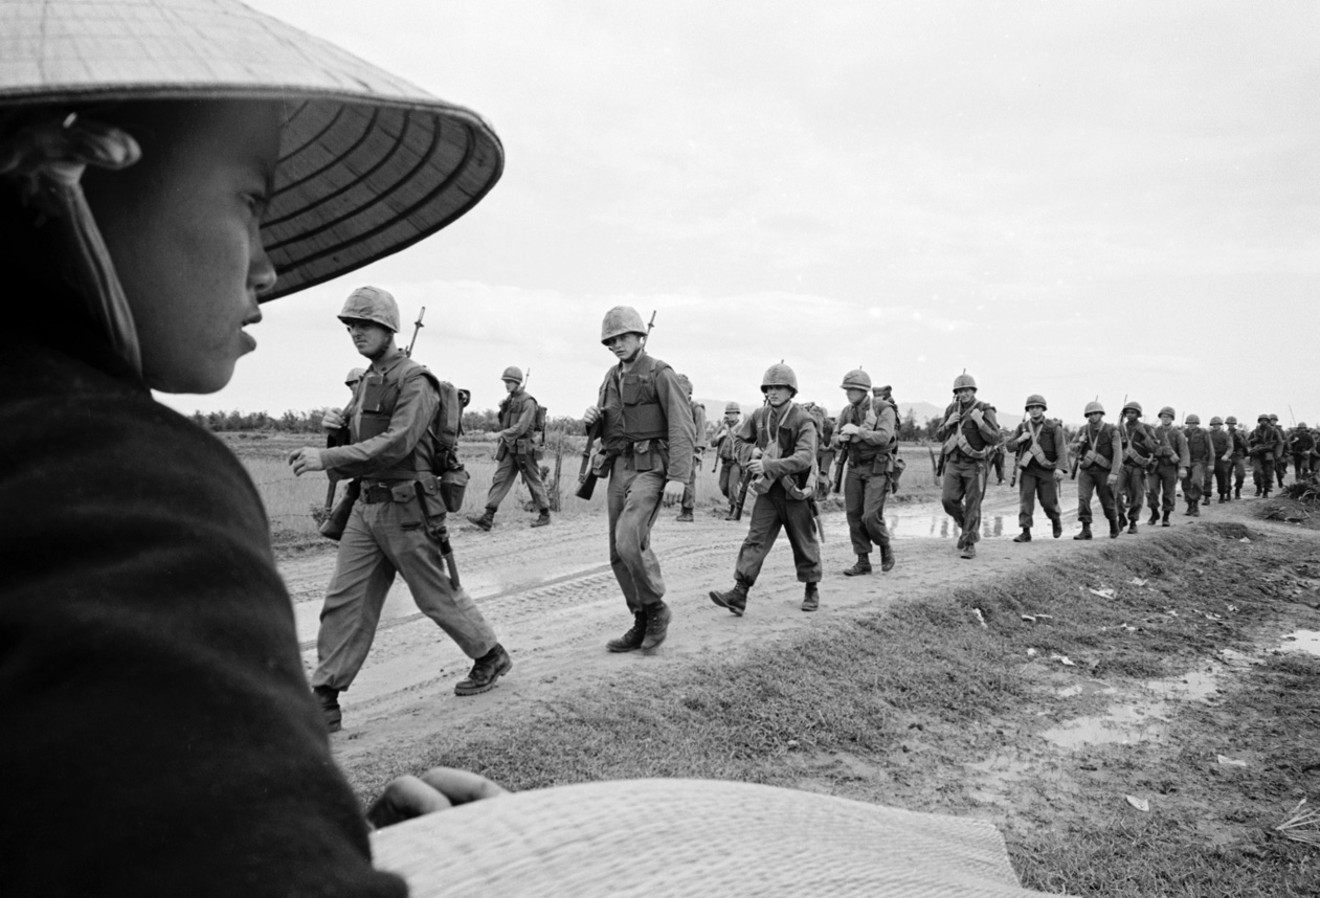 U.S. Marines, marching in Da Nang in March 1965, were among the subjects of The Vietnam War, an eighteen-hour, ten-part documentary by Ken Burns and Lynn Novick.